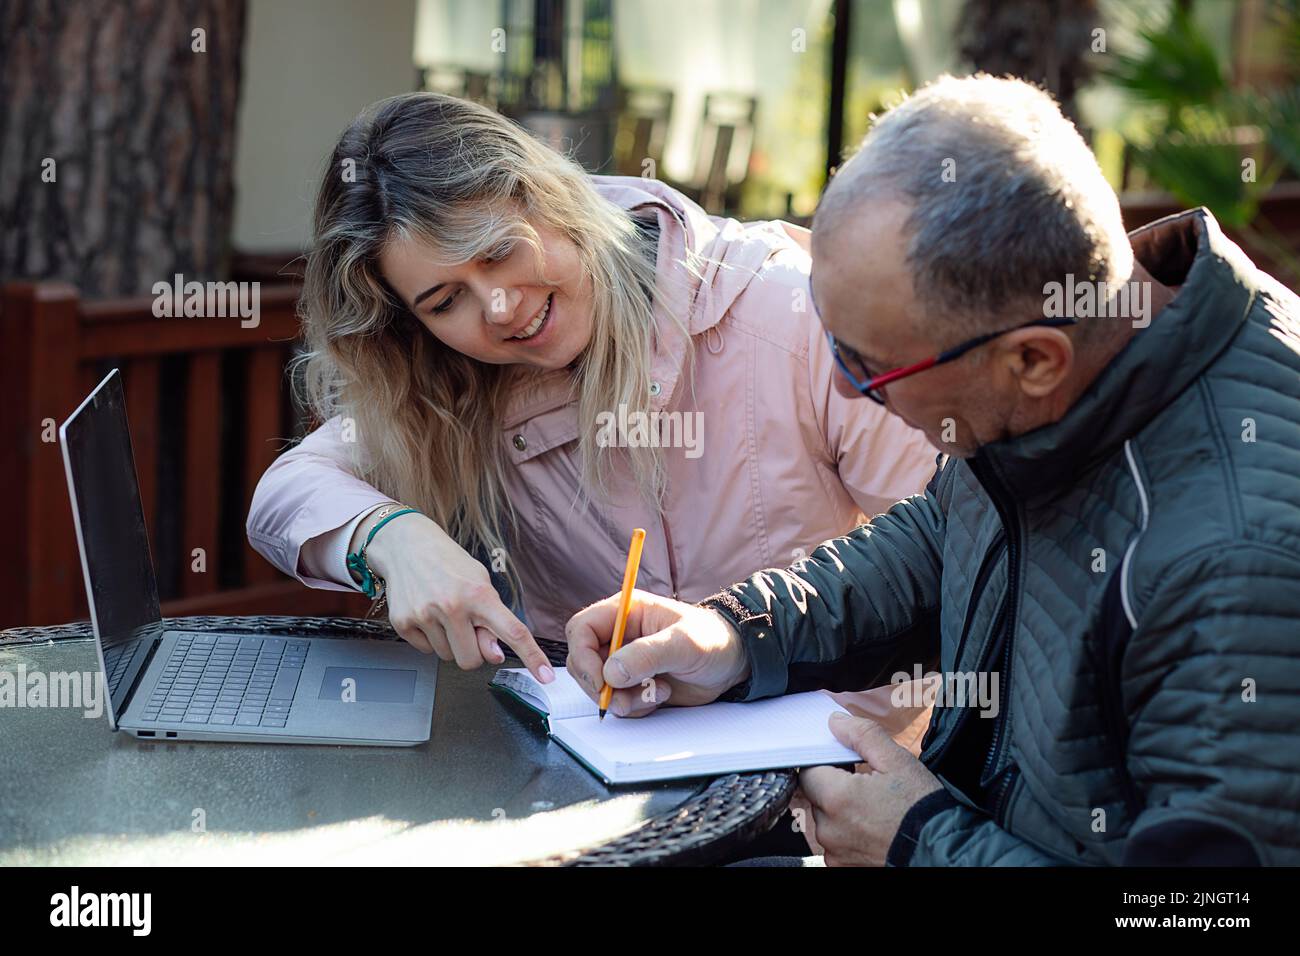 Portrait of young smiling woman daughter coach trainer sitting, talking to middle-aged man father, pointing at mistakes. Stock Photo